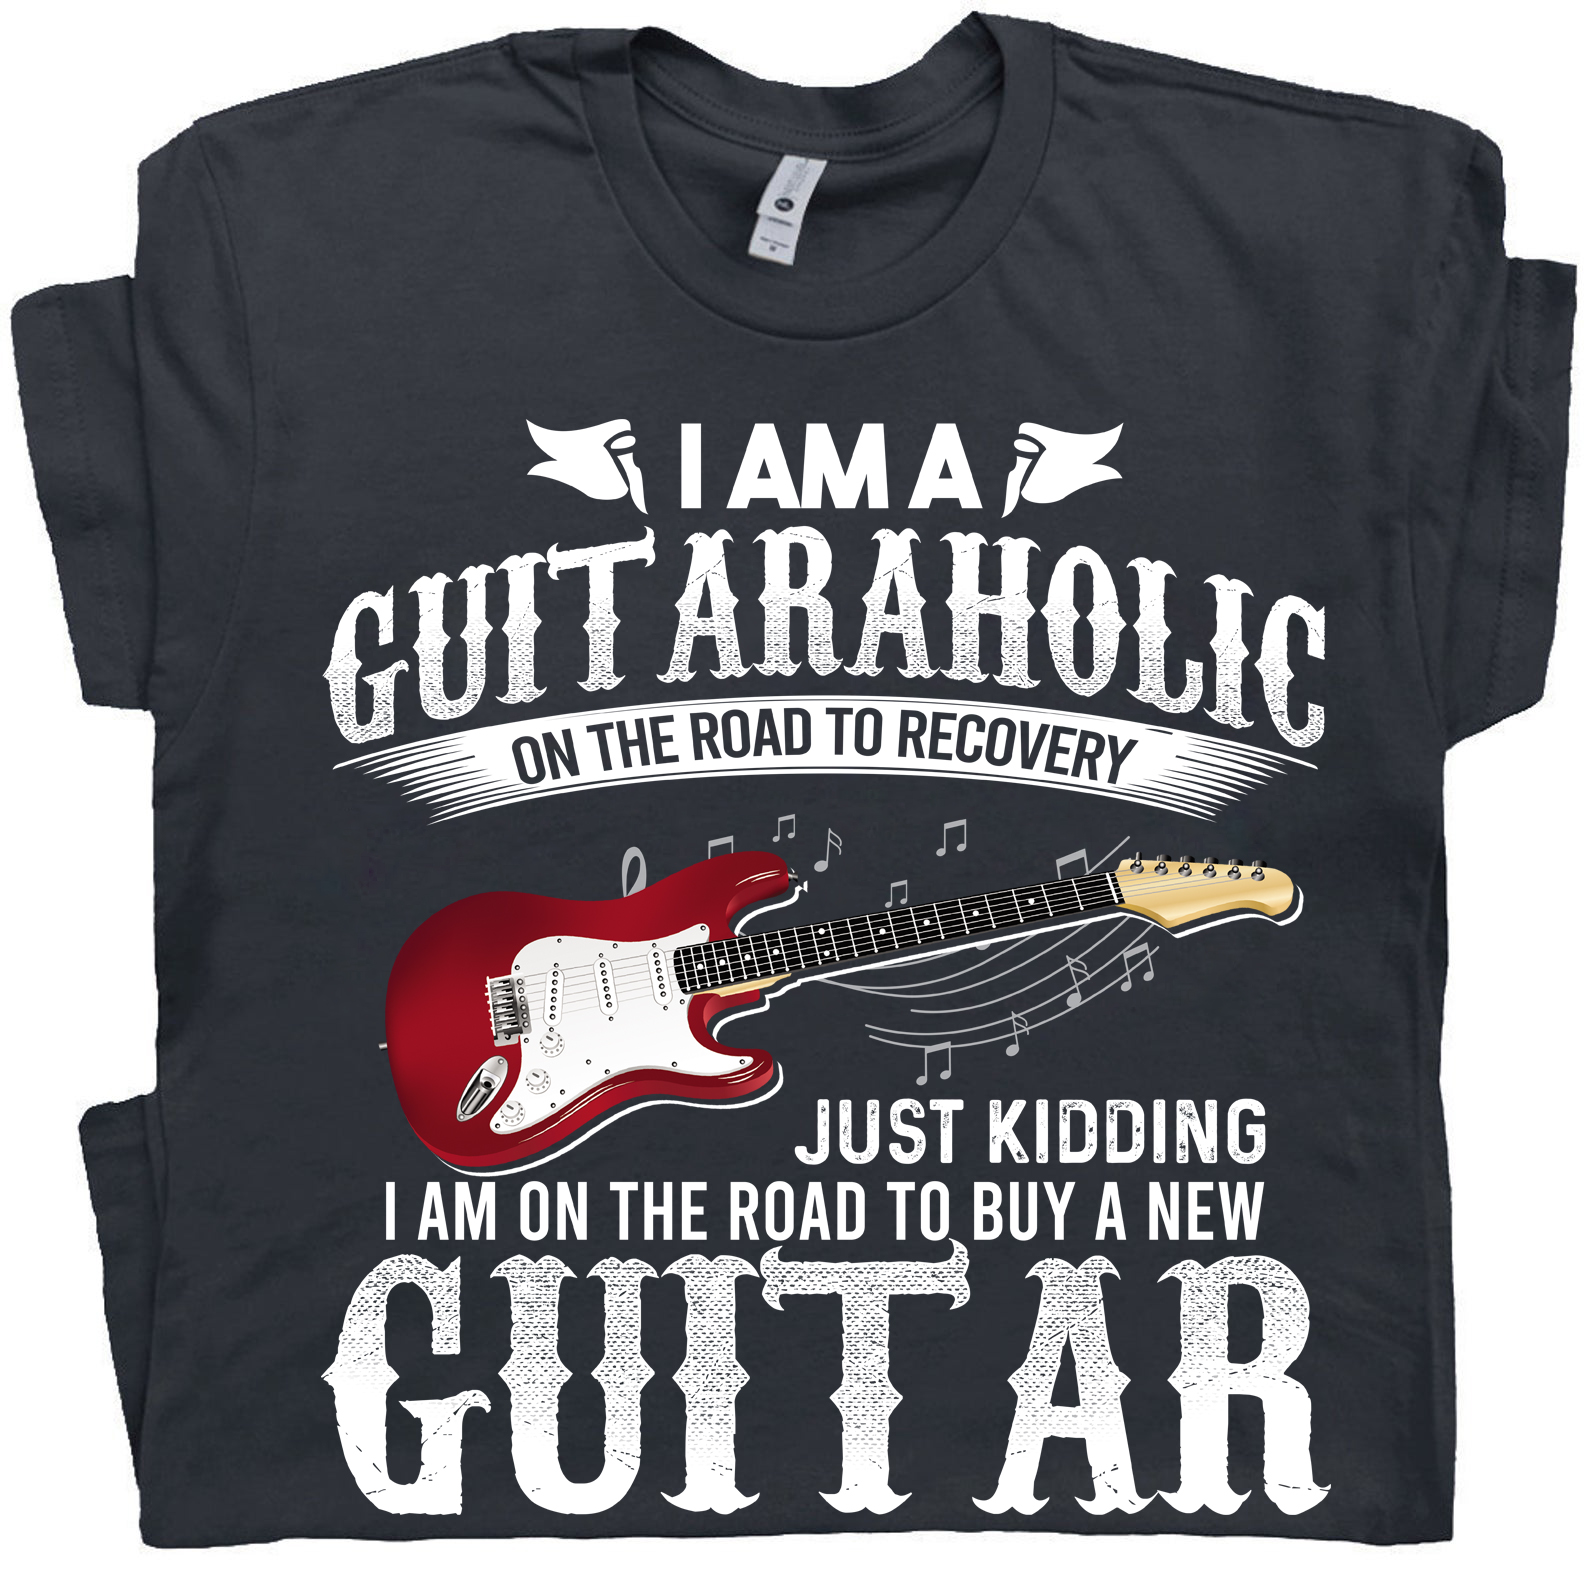 I am a Guitaraholic on the road to recovery - Guitar lover